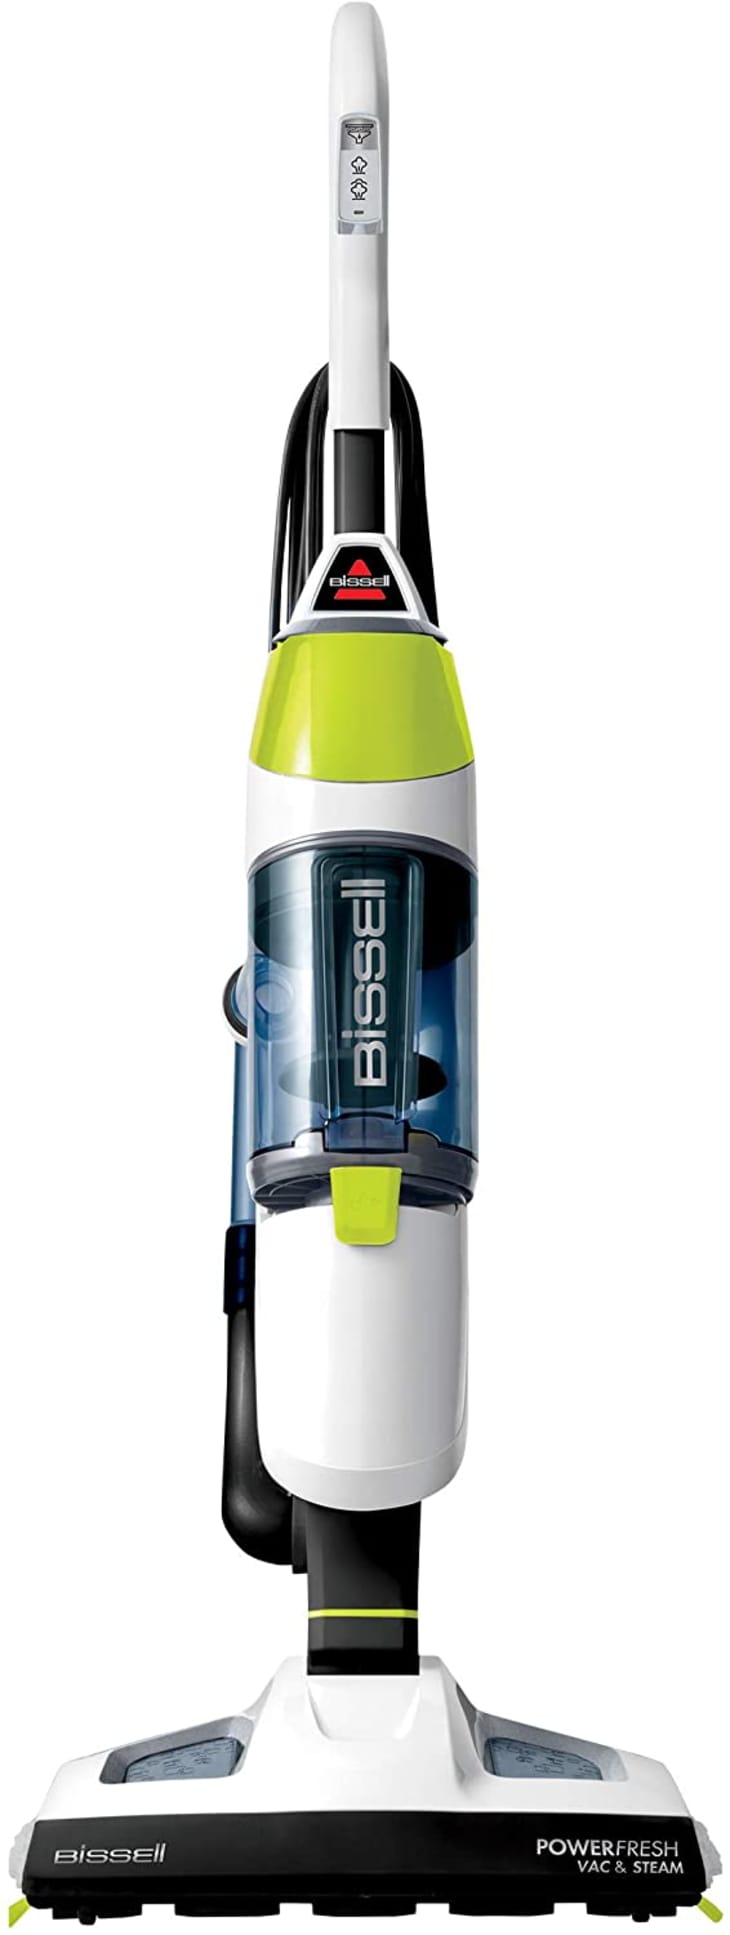 Bissell PowerFresh All-in-One Vacuum and Steam Mop at Amazon